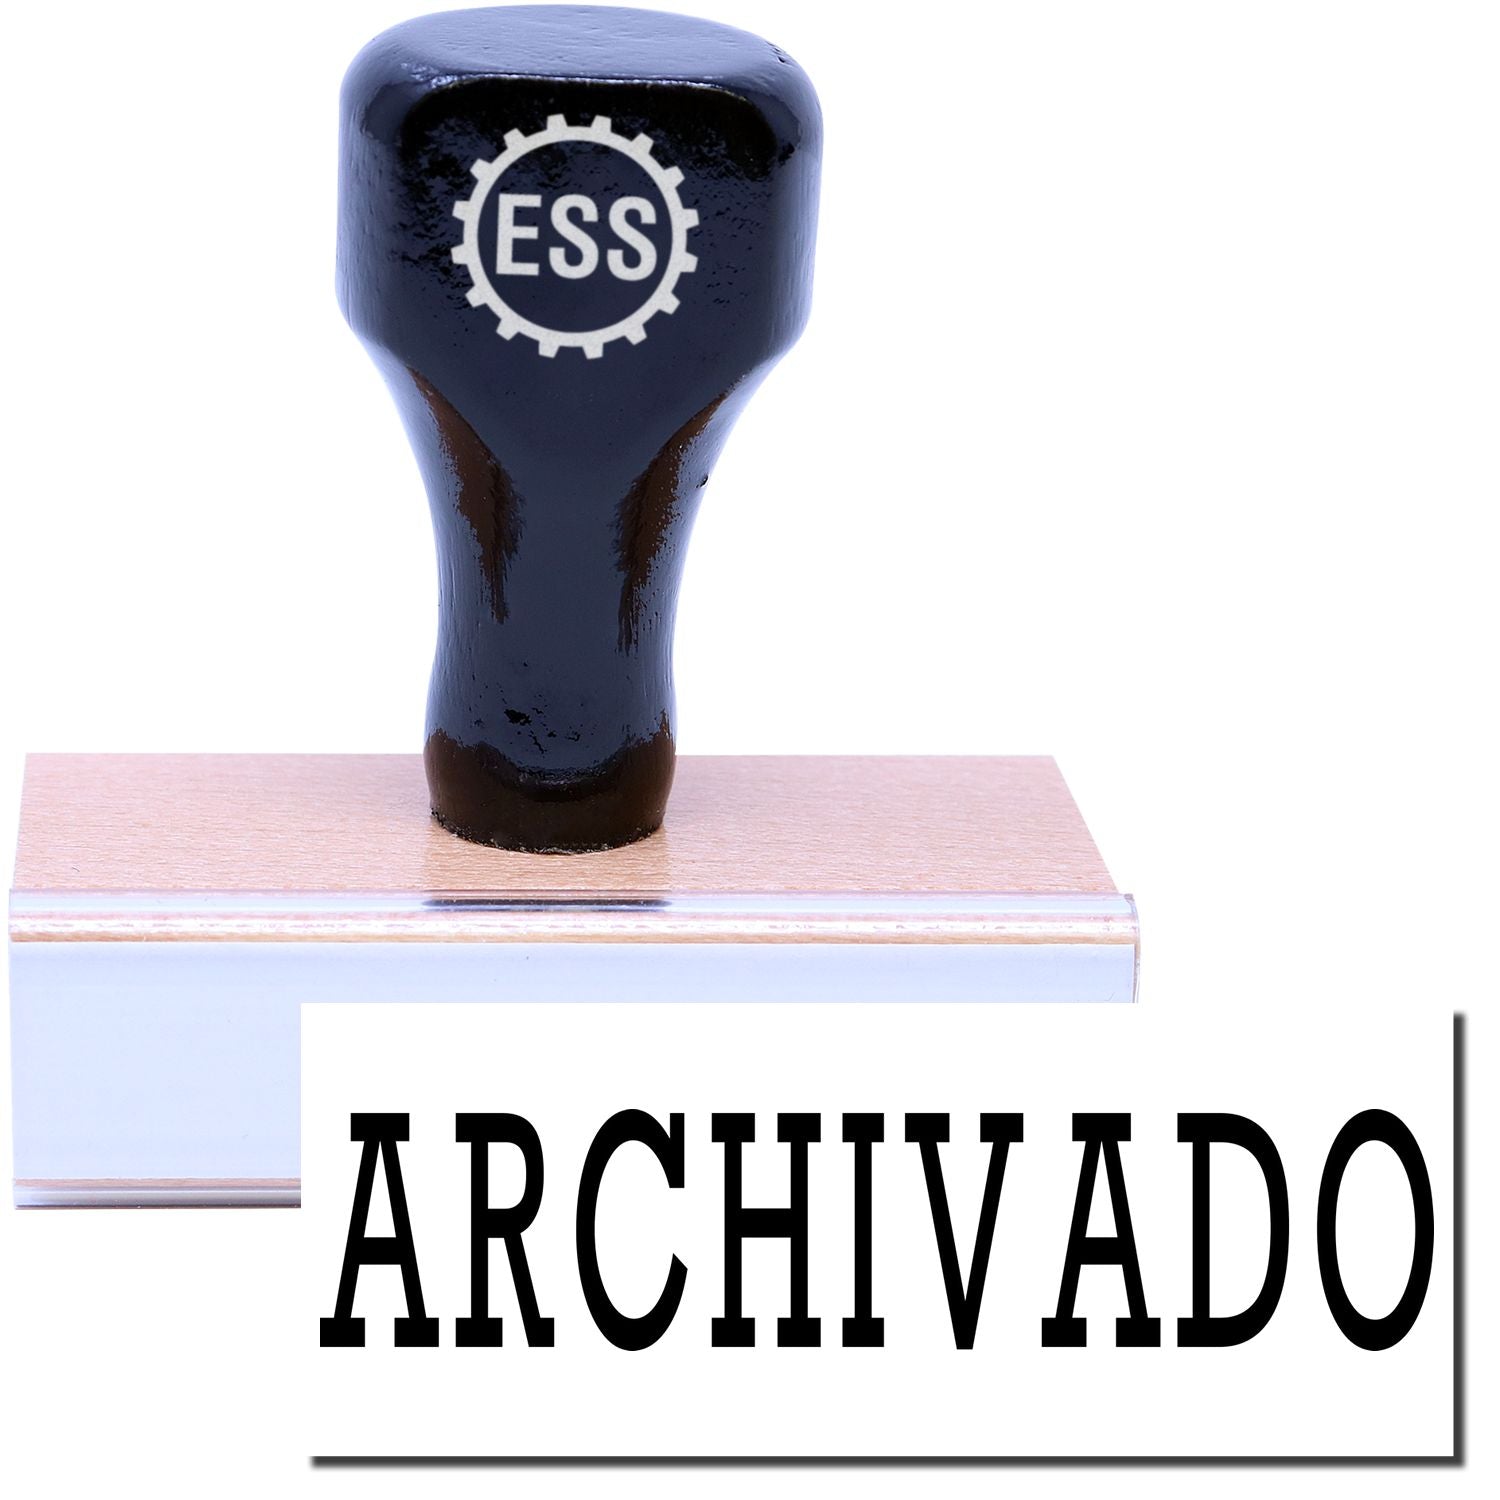 A stock office rubber stamp with a stamped image showing how the text "ARCHIVADO" is displayed after stamping.